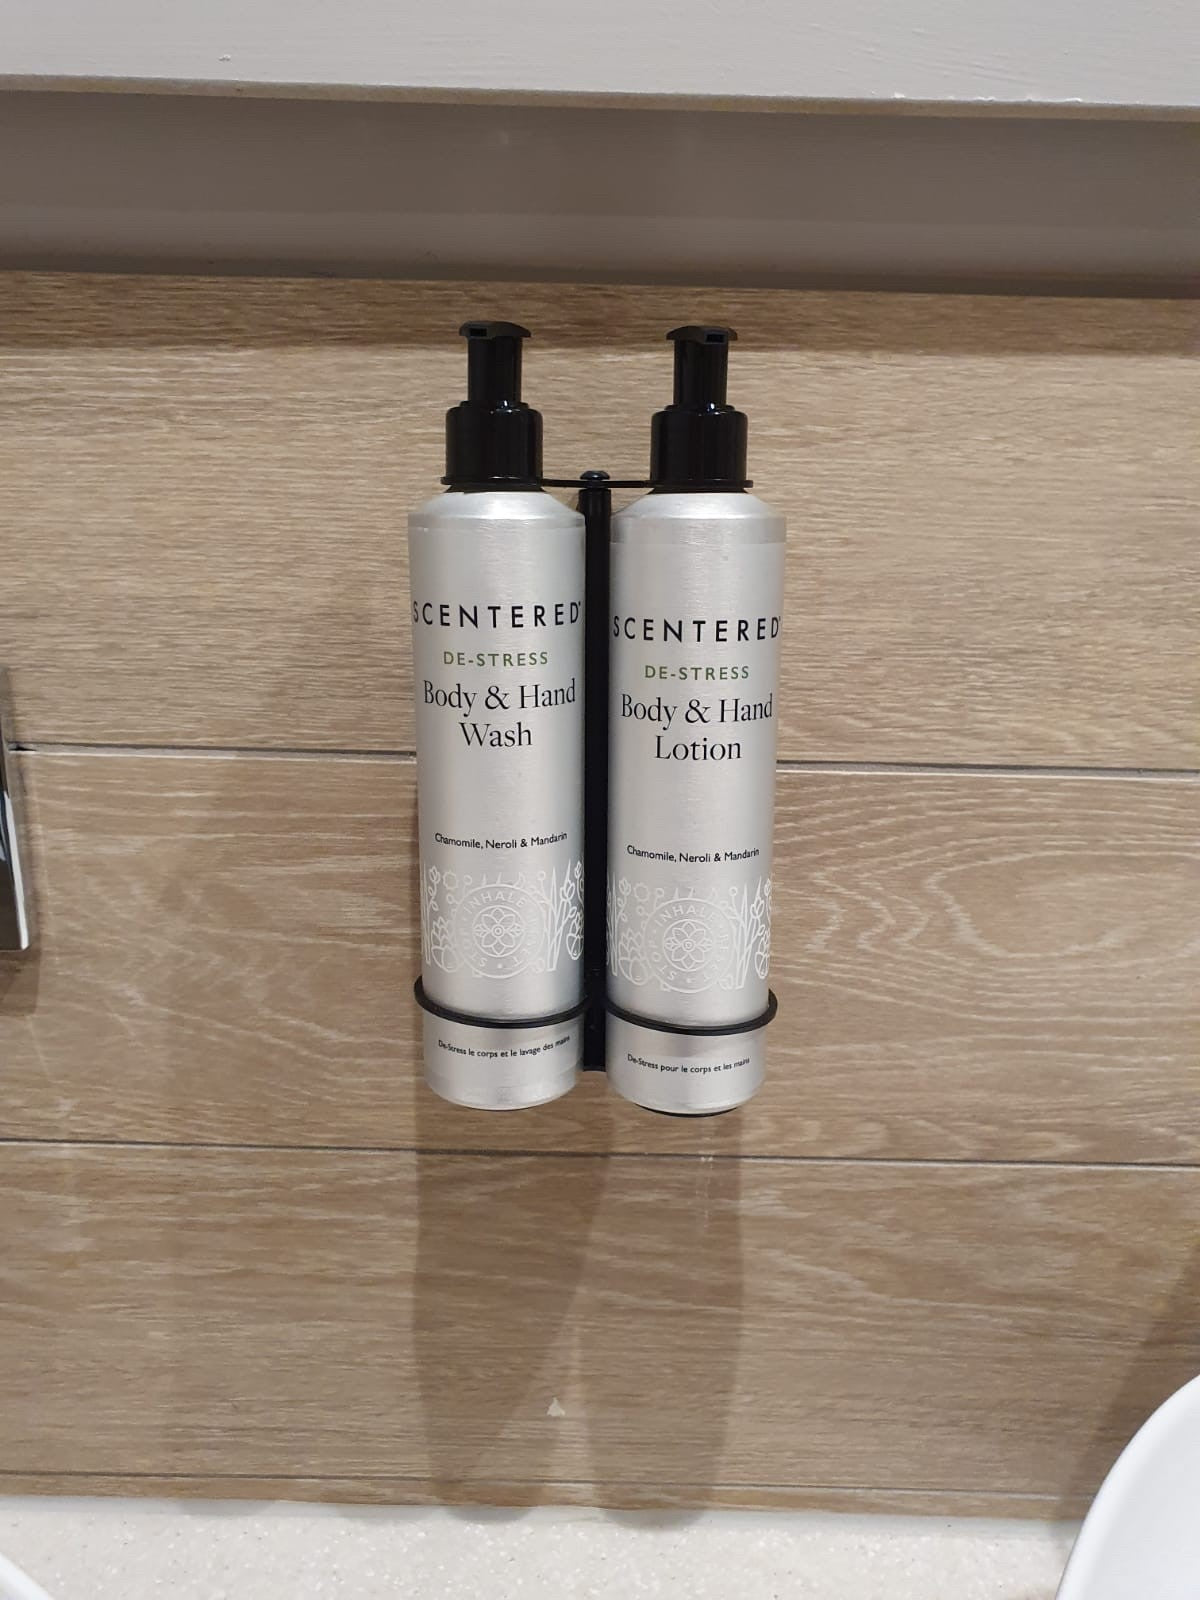 Scentered De-Stress Wash and Scentered De-Stress Lotion Duo held in Wall Bracket on Wood Backing in Bathroom 